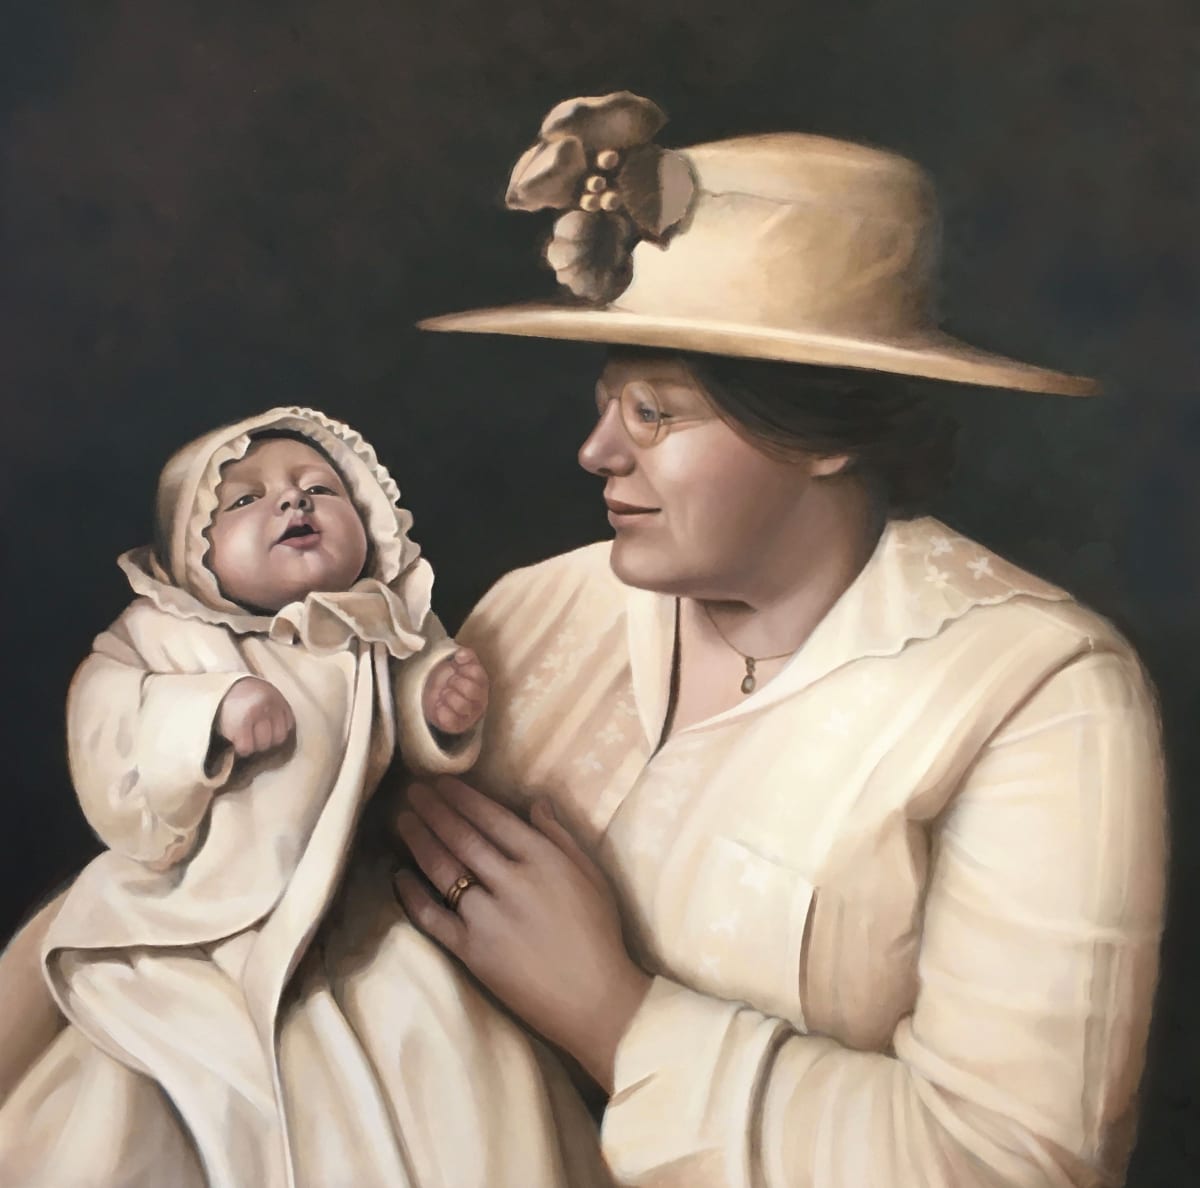 Mother & Child, 1919 by Susan Helen Strok  Image: "Mother & Child, 1919" oil painting